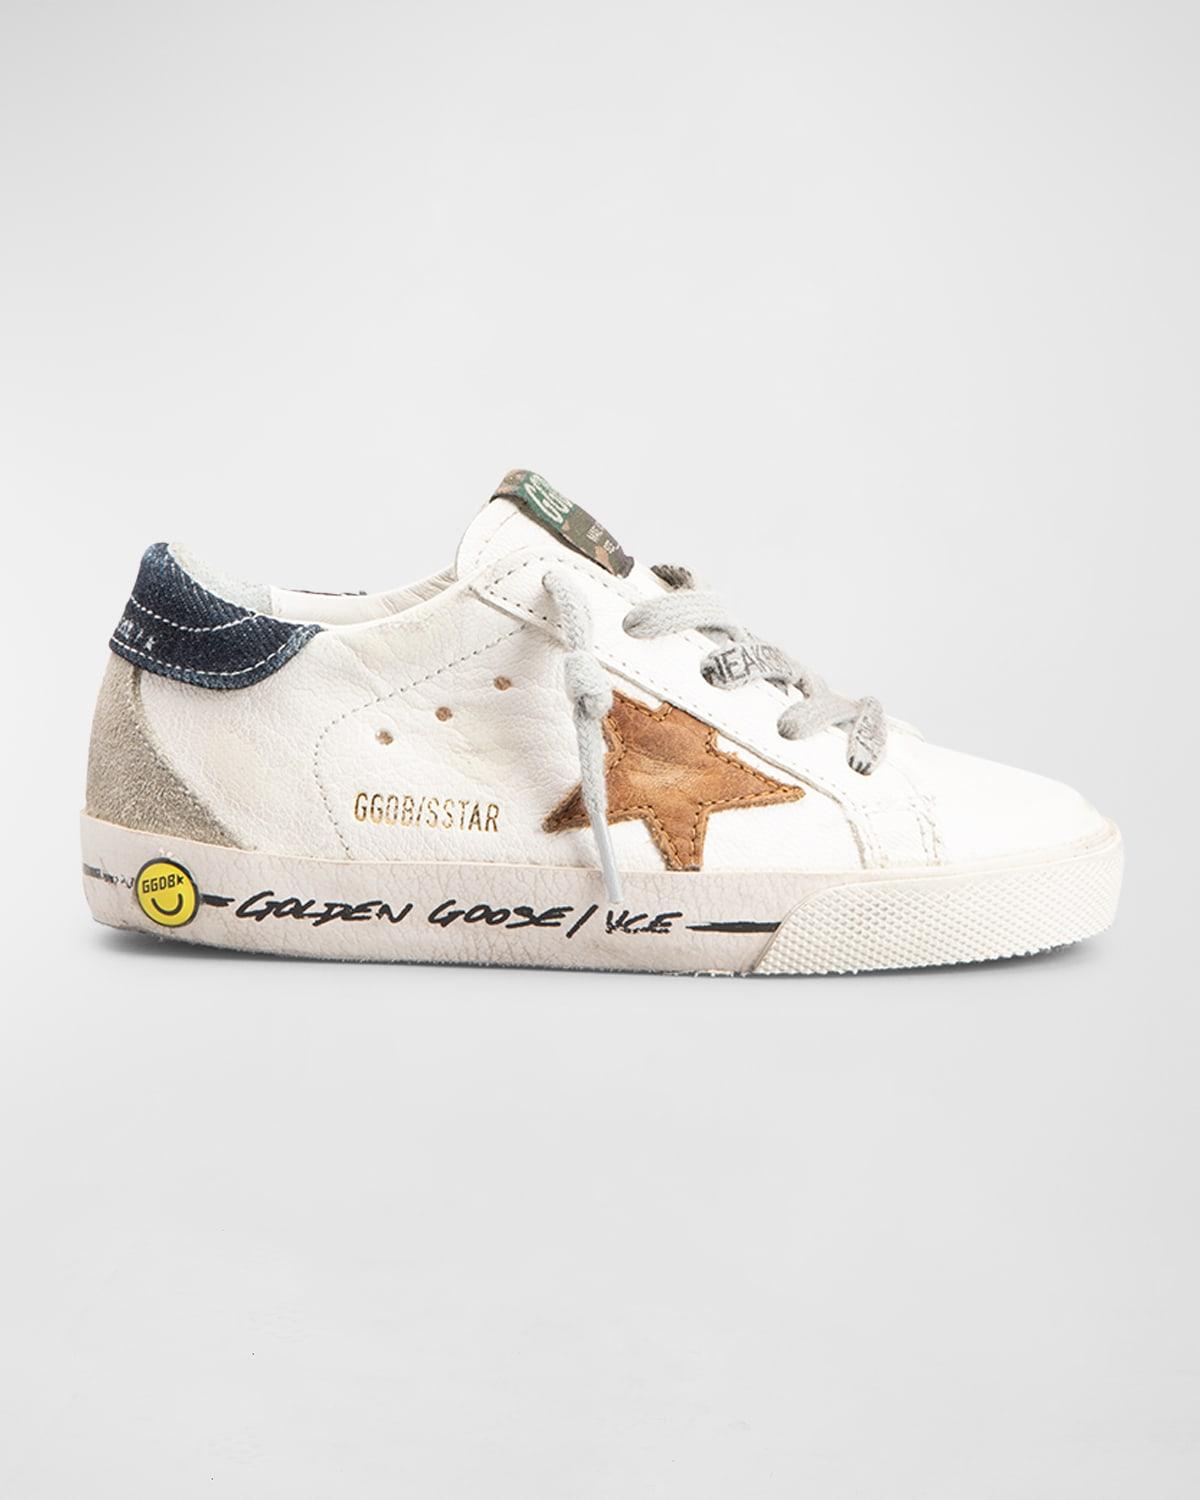 Golden Goose Kid's Super Star Nappa Leather Sneakers, Size Baby ...